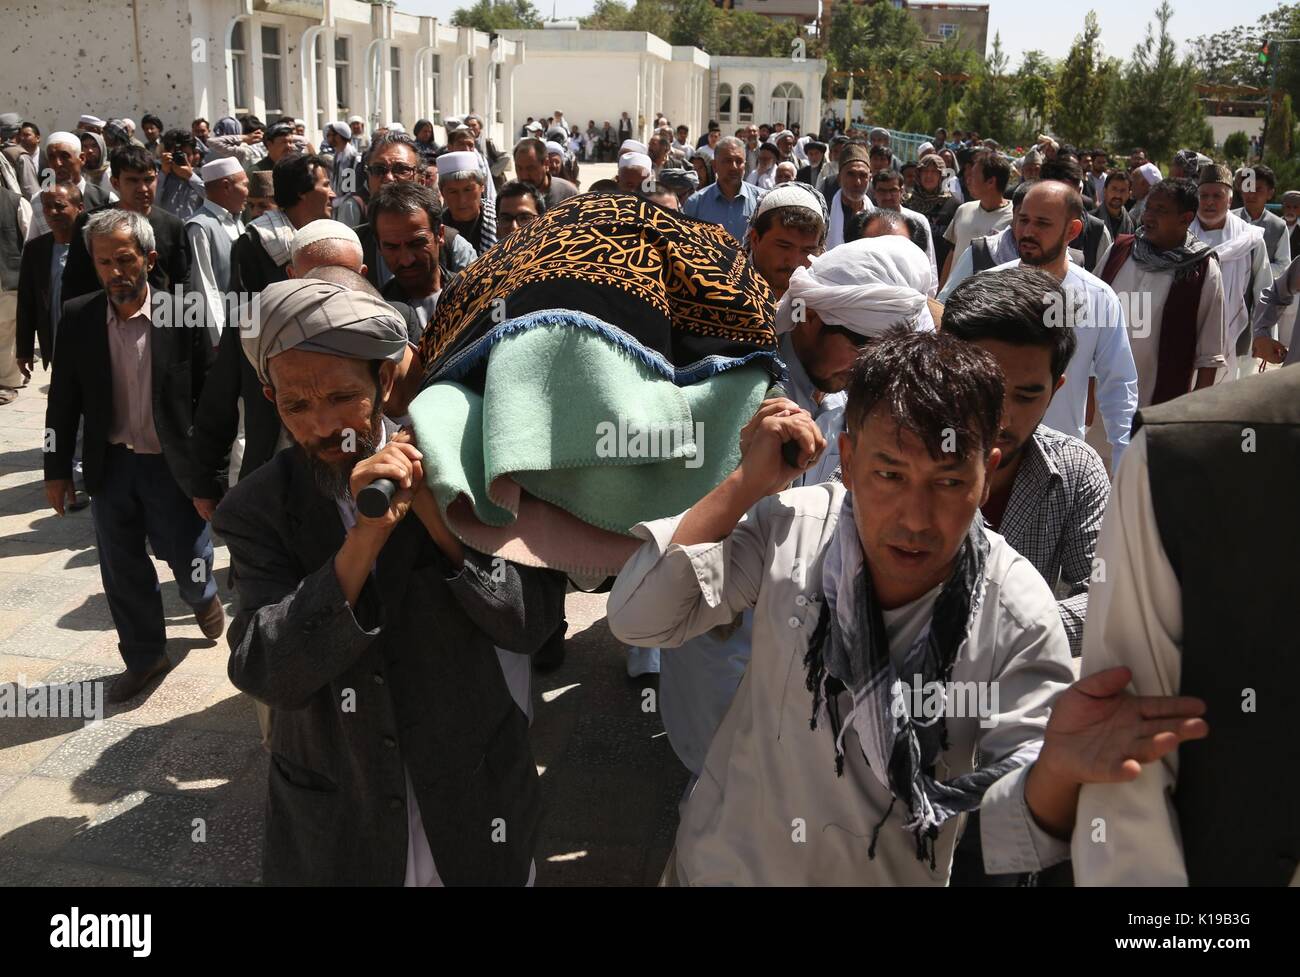 (170826) -- KABUL, Aug. 26, 2017 (Xinhua) -- Mourners carry the coffin of a victim of the recent terrorist attack on a Shiite Mosque during a funeral in Kabul, capital of Afghanistan, Aug. 26, 2017. At least 40 were killed while 90 others were wounded at the mosque on Friday in Kabul. (Xinhua/Rahmat Alizadah) (swt) Stock Photo